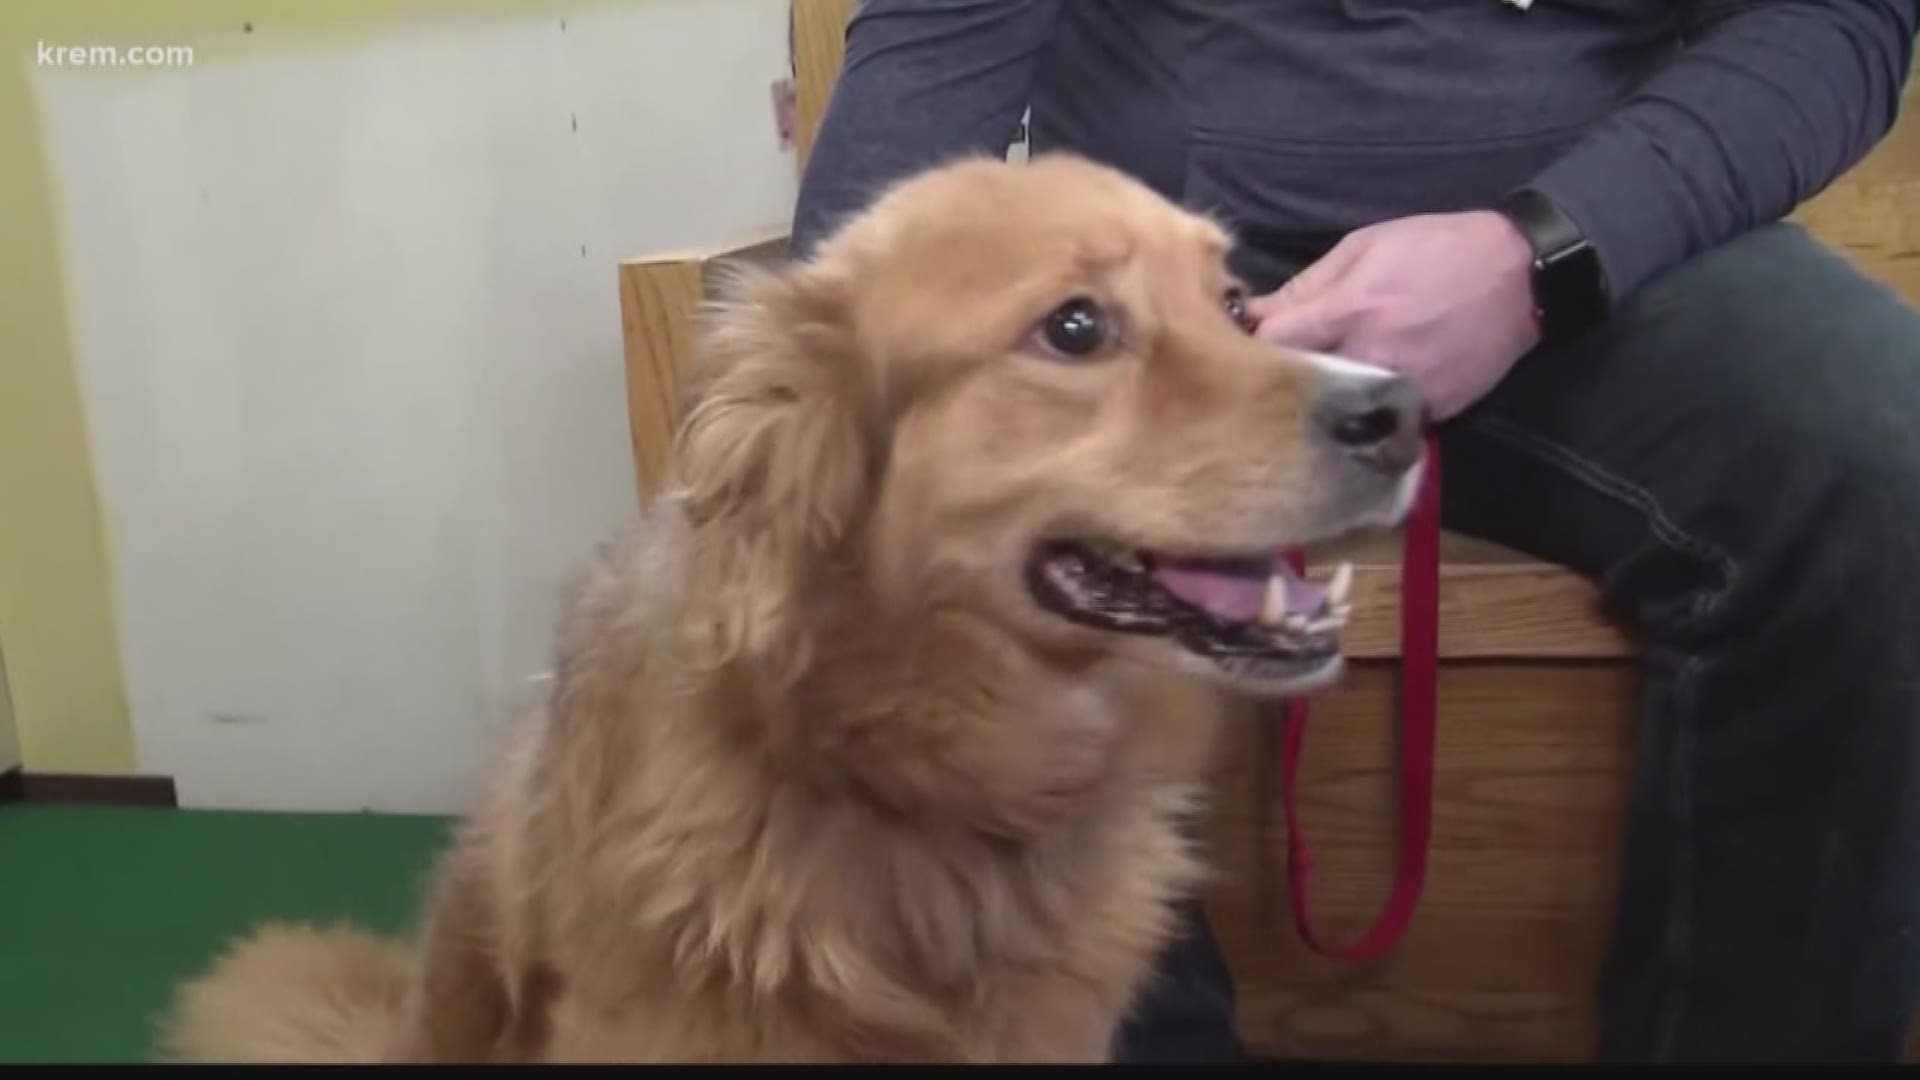 KREM Reporter Amanda Roley visited with local animal vets to talk about how they are staying vigilant against people using their pets to get opioids.